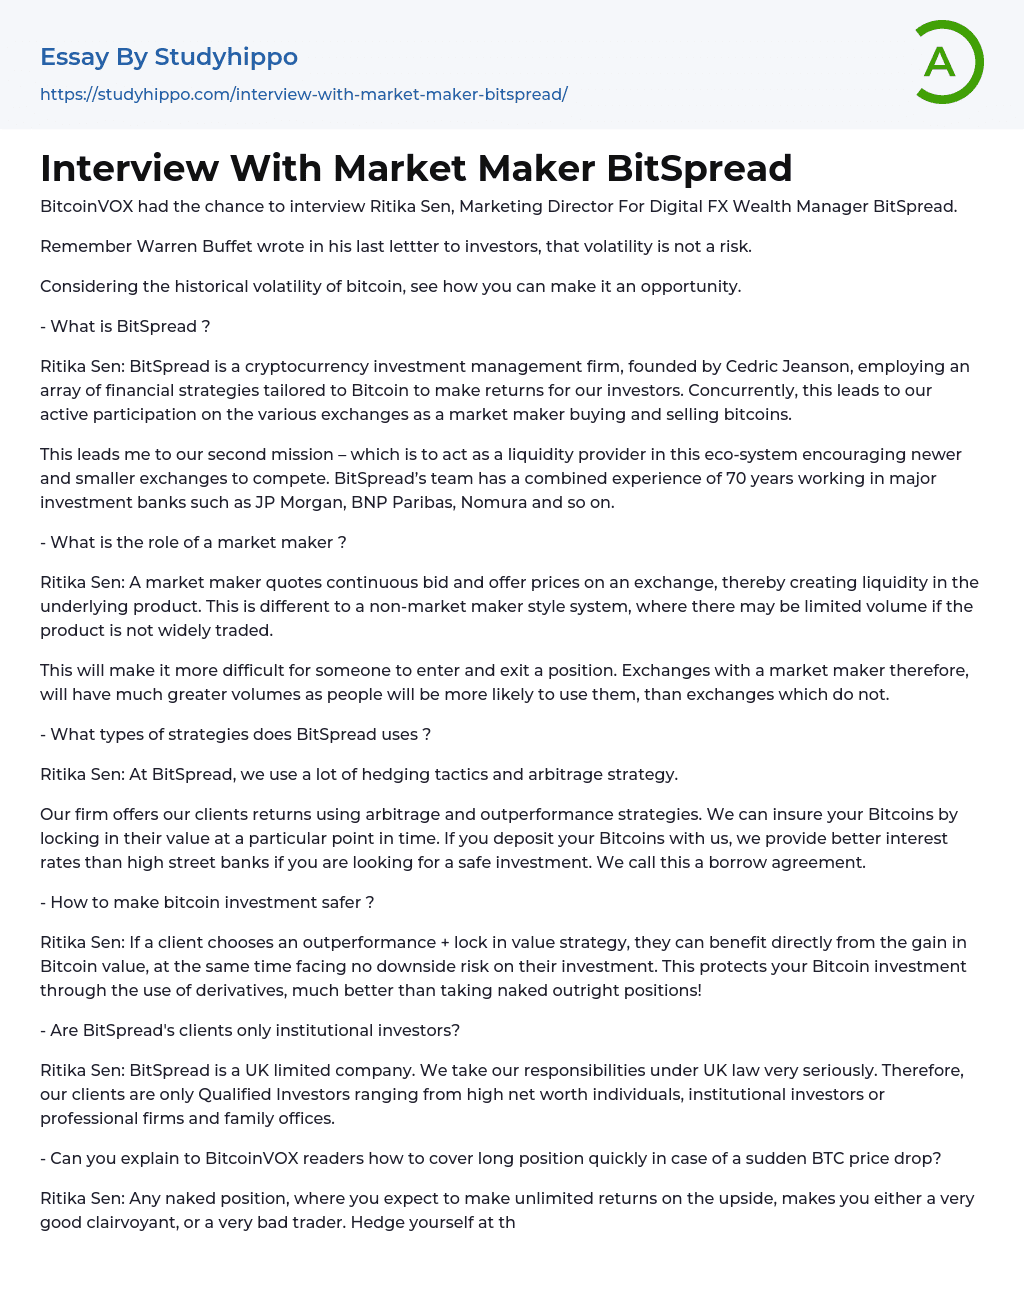 Interview With Market Maker BitSpread Essay Example